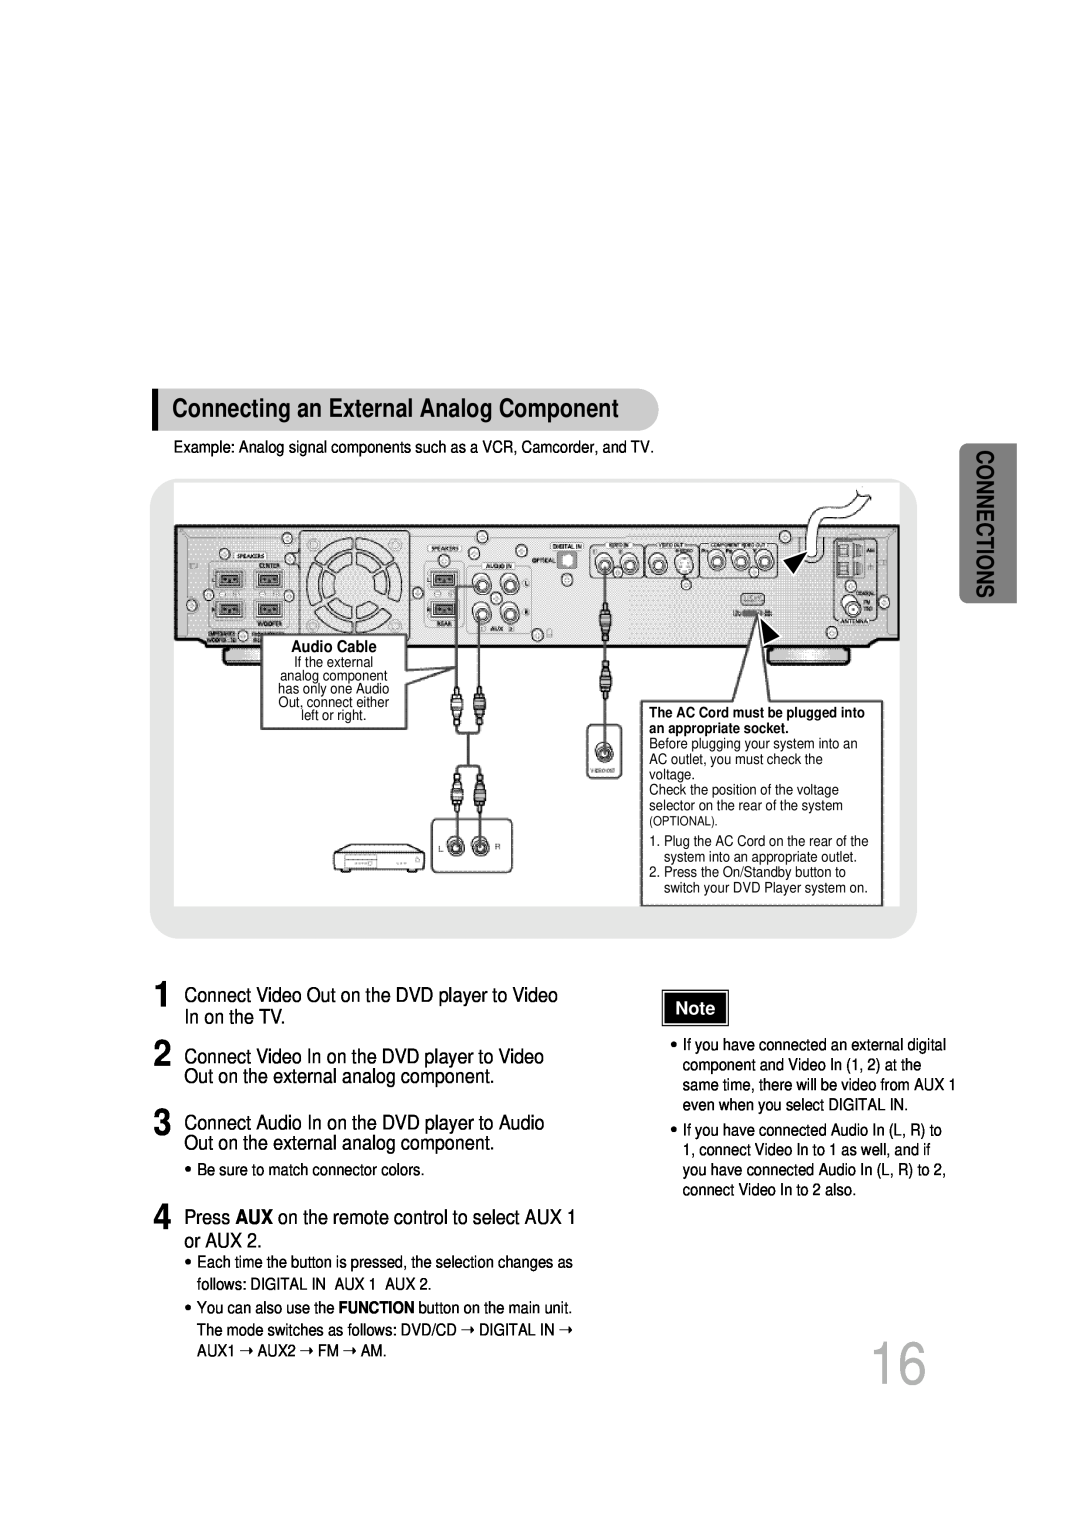 Samsung HT-DB1650, HT-DB350 instruction manual Connecting an External Analog Component, Connections, Audio Cable 